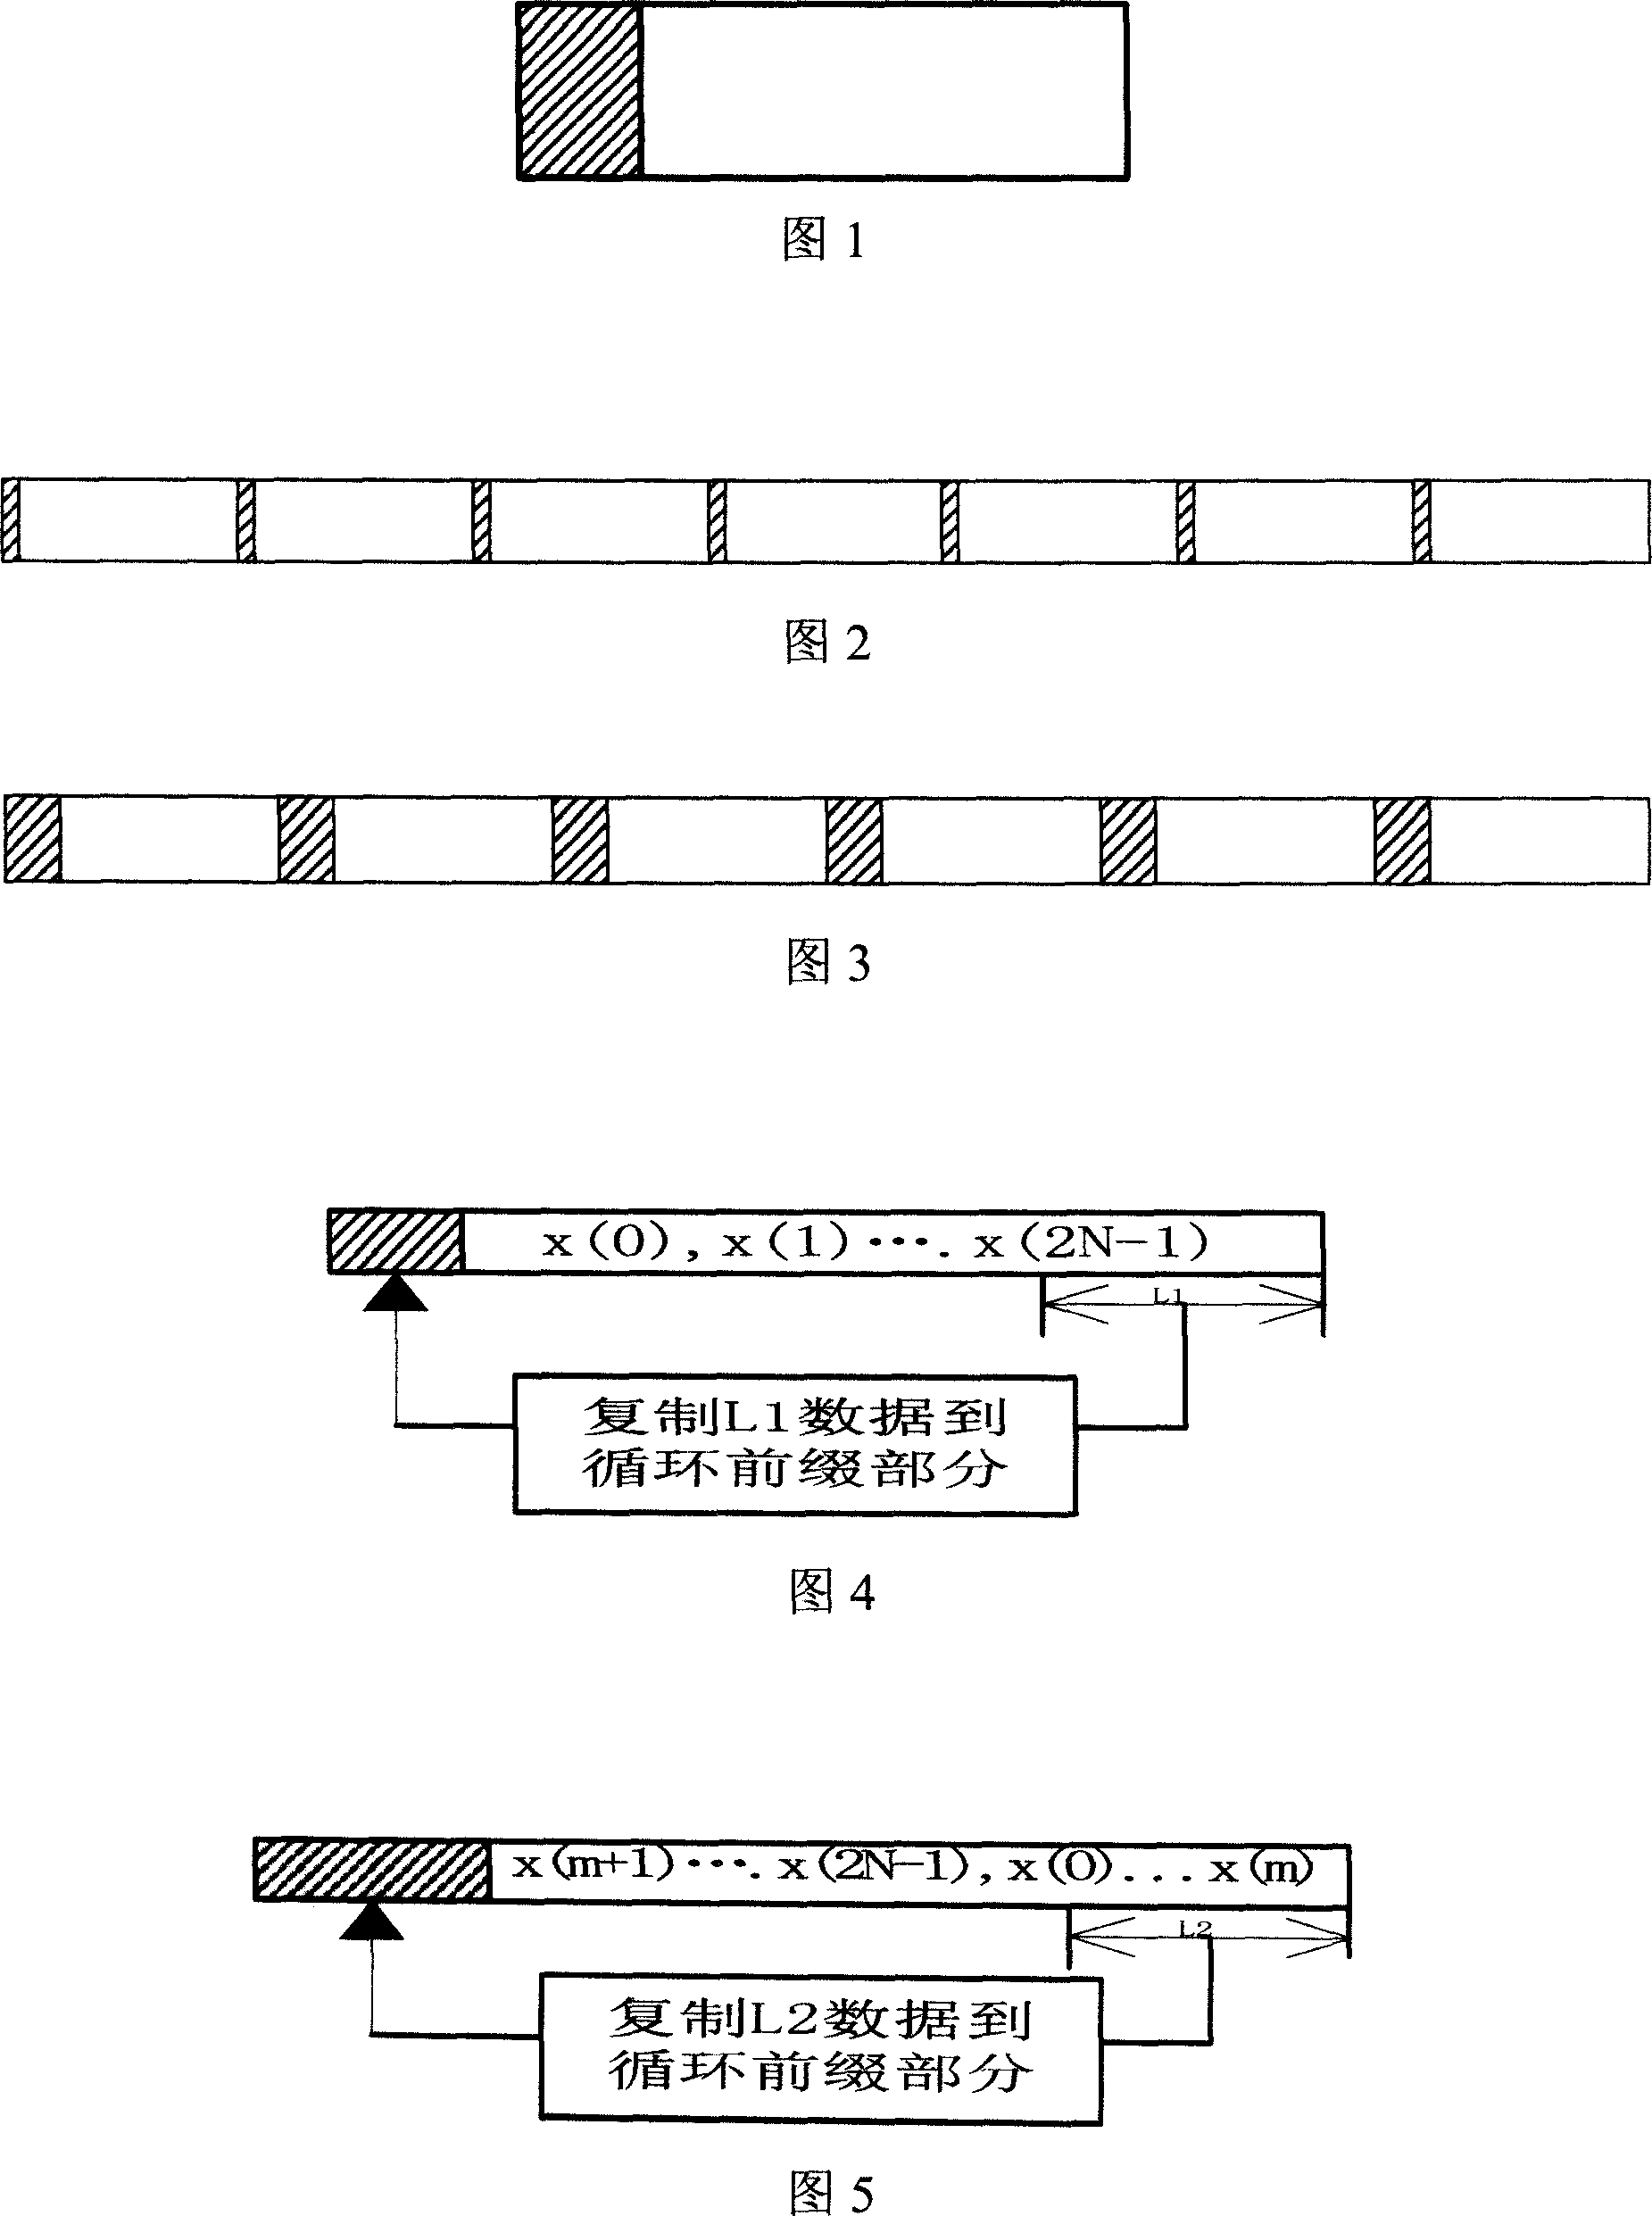 Synchronous signal sending and detecting method for orthogonal frequency division complex system